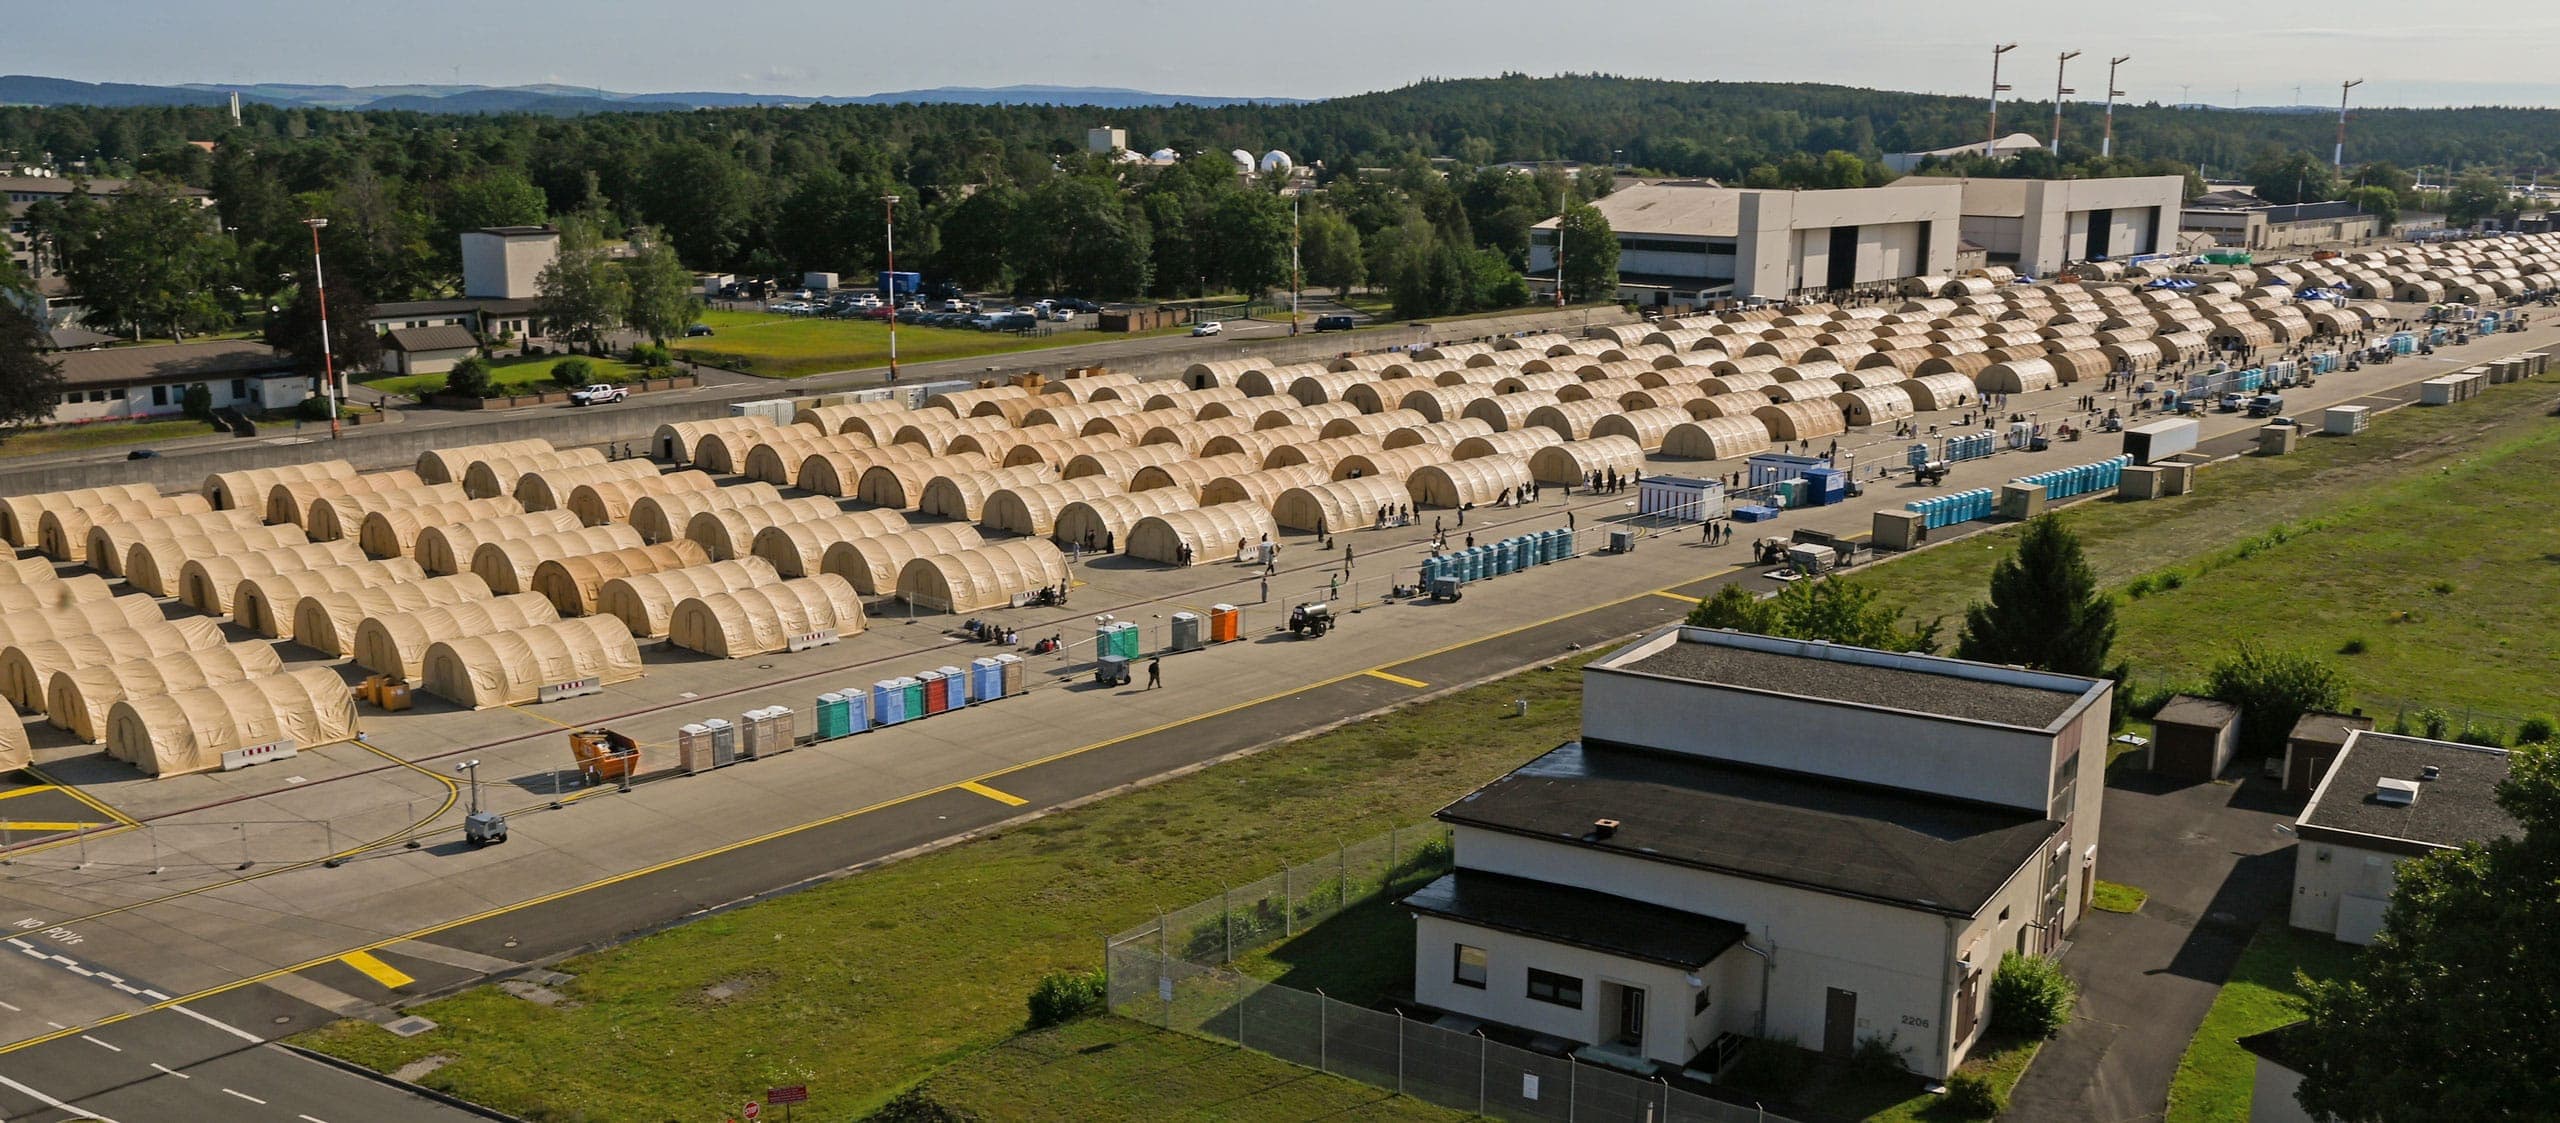 Military shelter systems from Alaska Defense deployed on the flightline of Ramstein Air Base